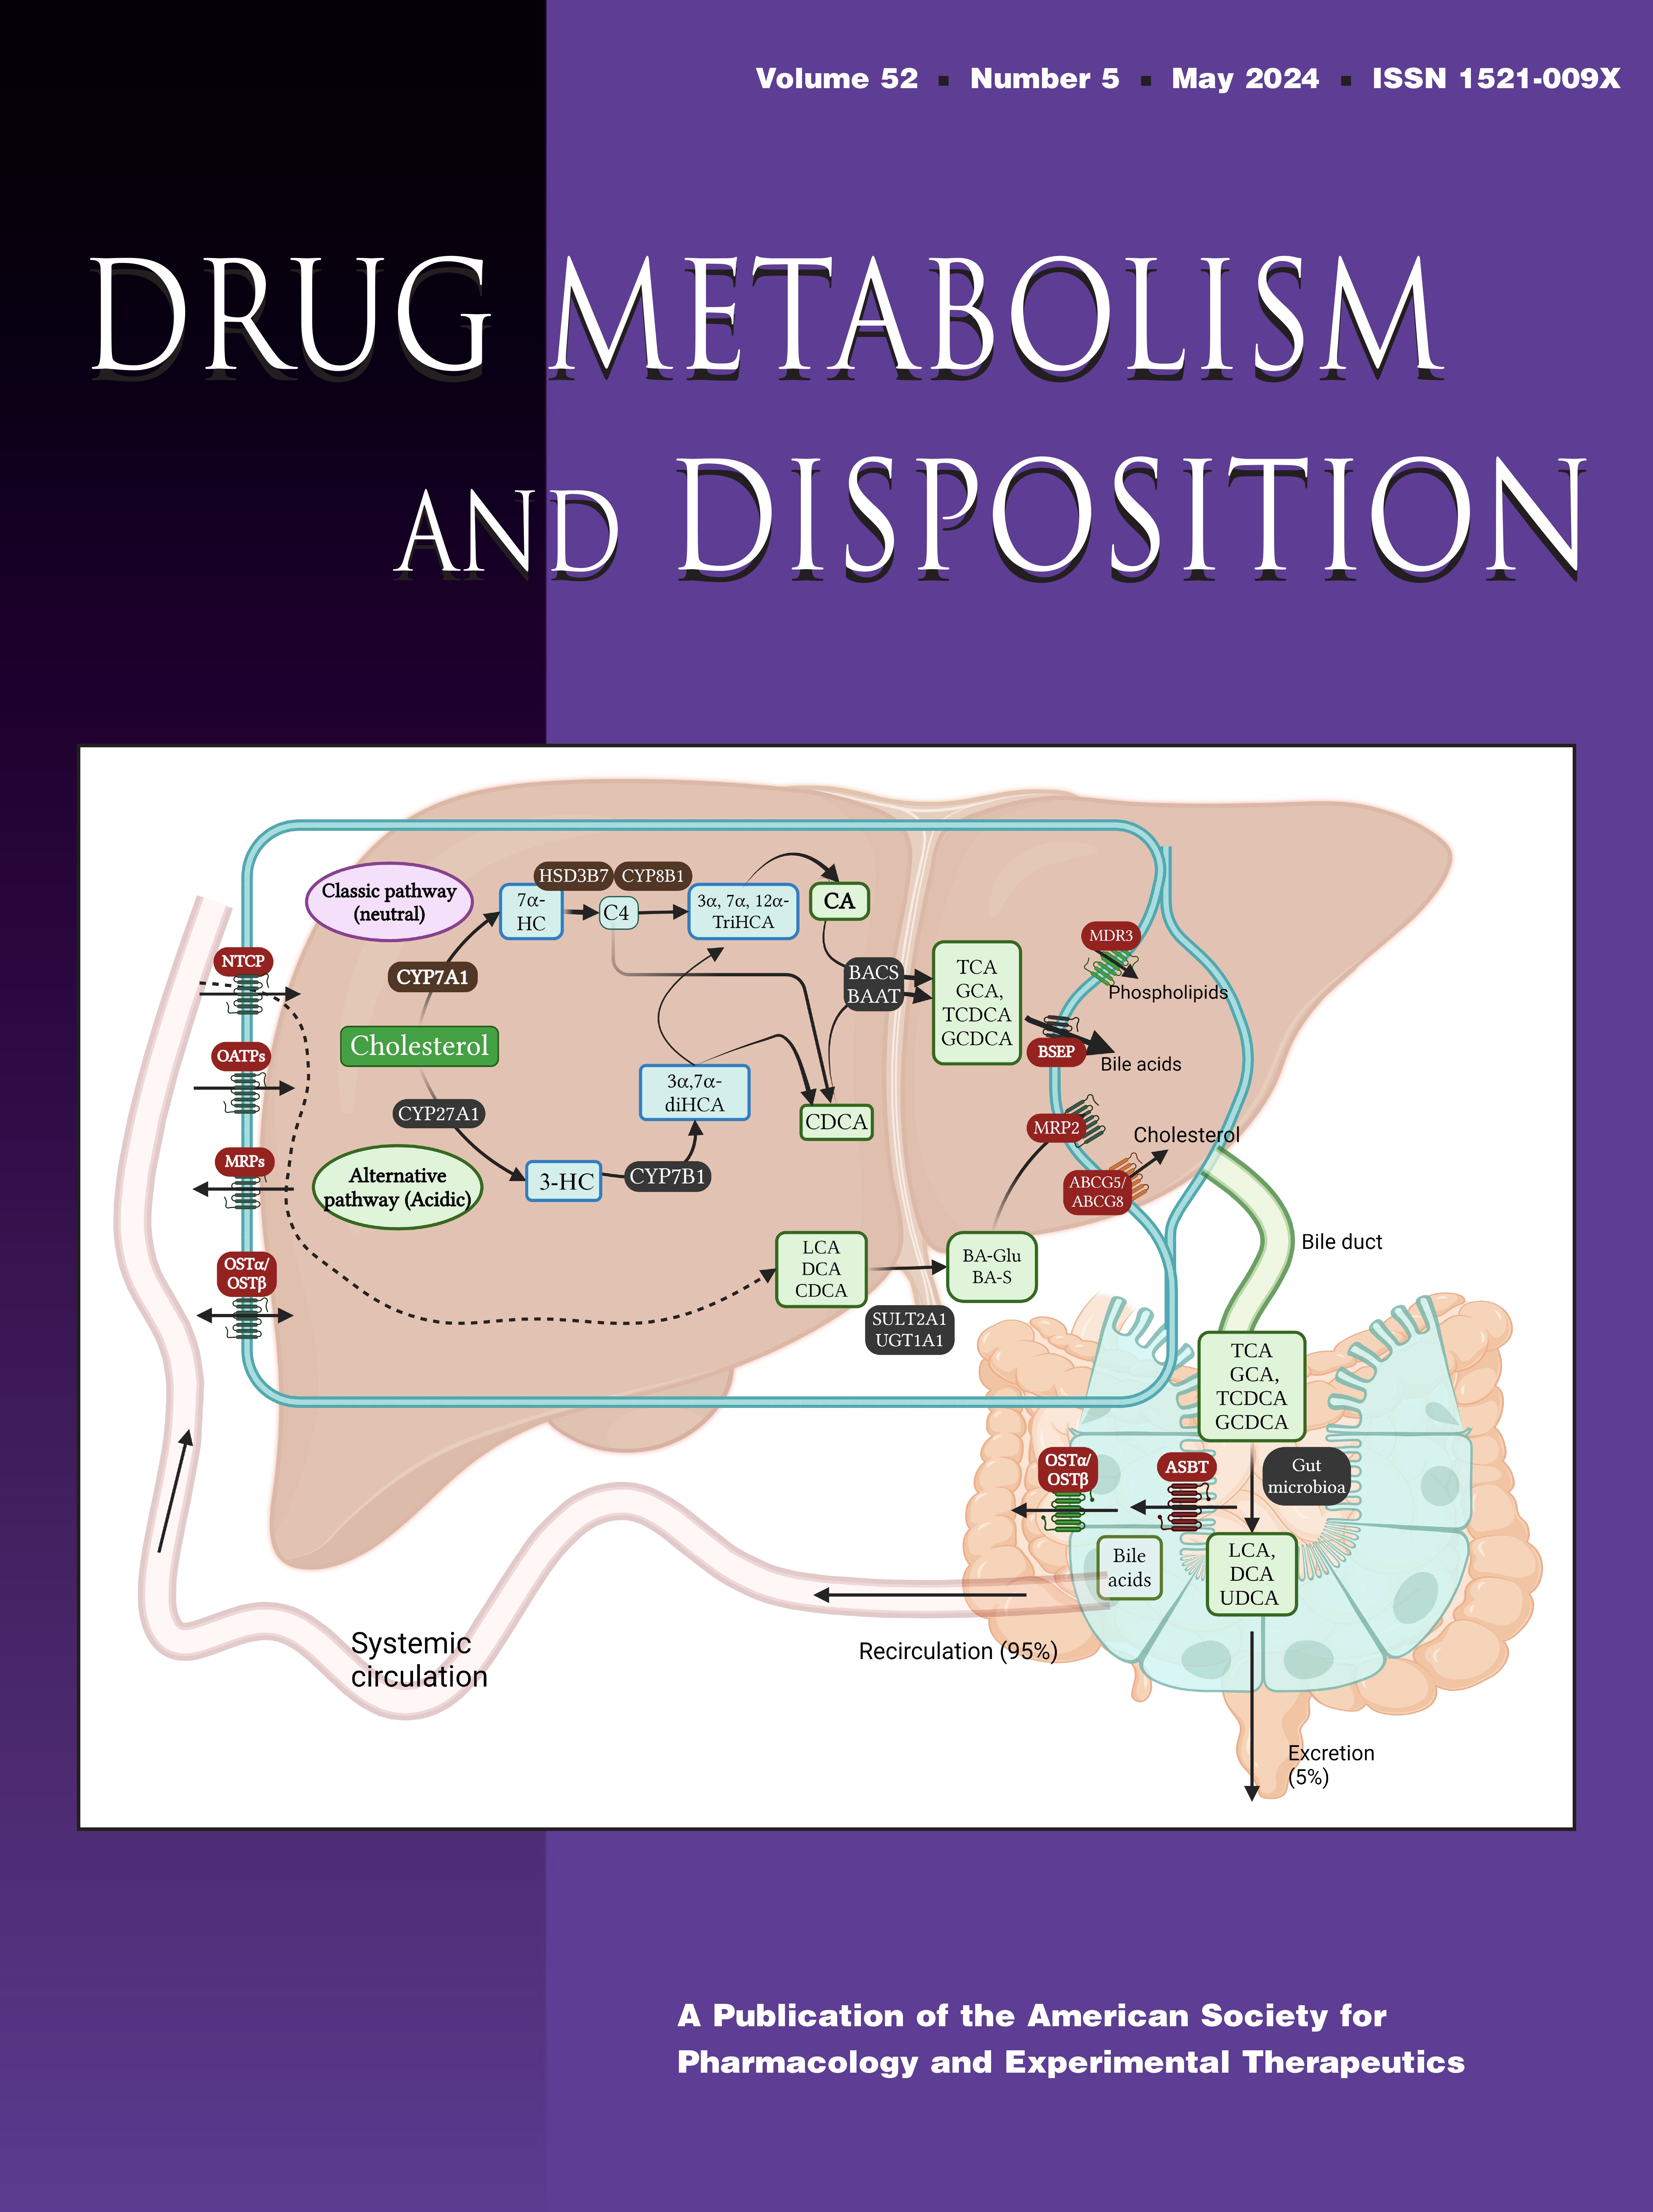 Pharmacogenetic Influence on Stereoselective Steady-State Disposition of Bupropion [Articles]